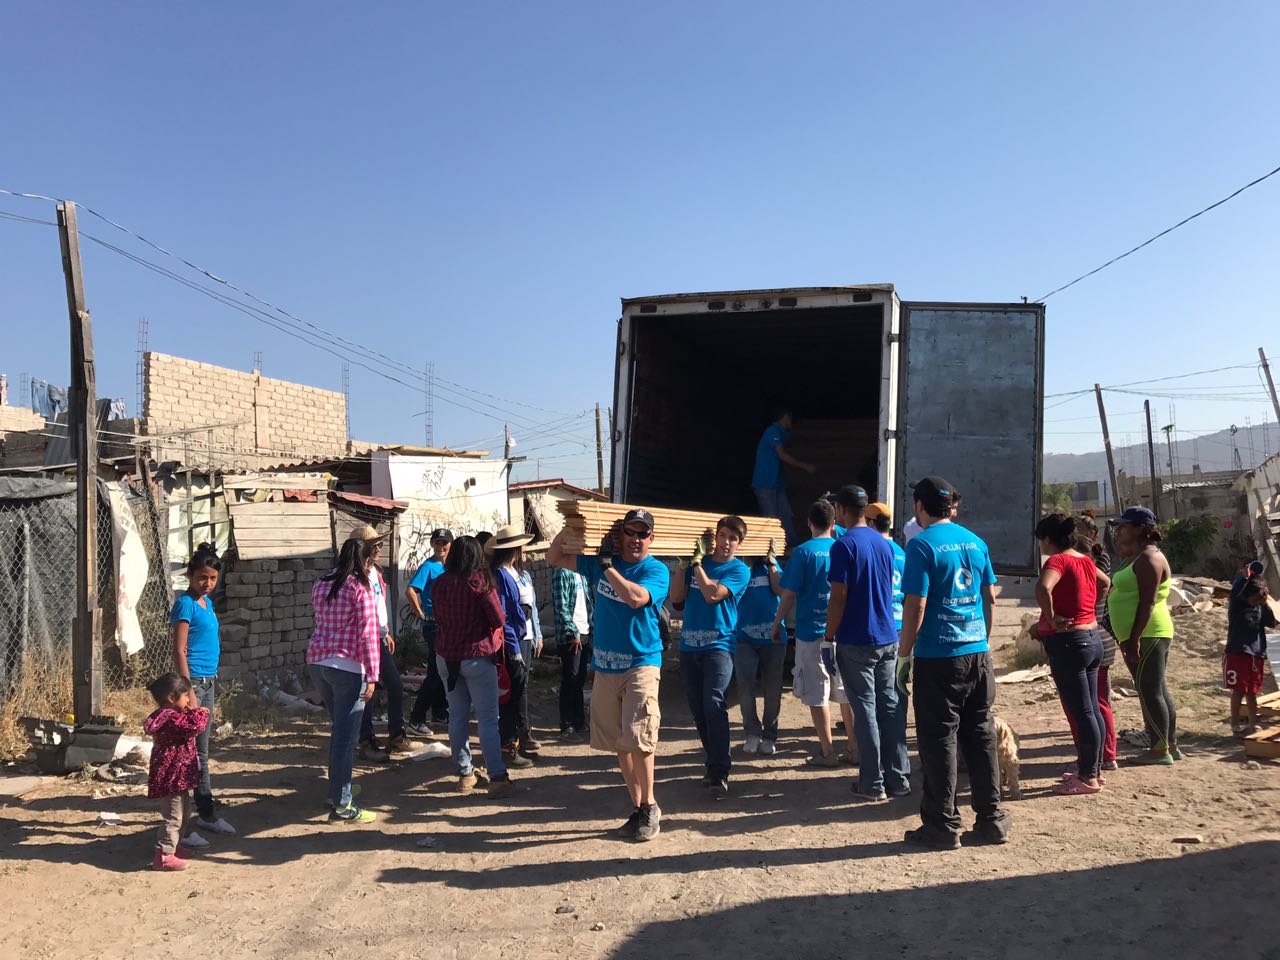 Arpin Strong, helps unload a truck while building homes for the homeless in Guadalajara Mexico.